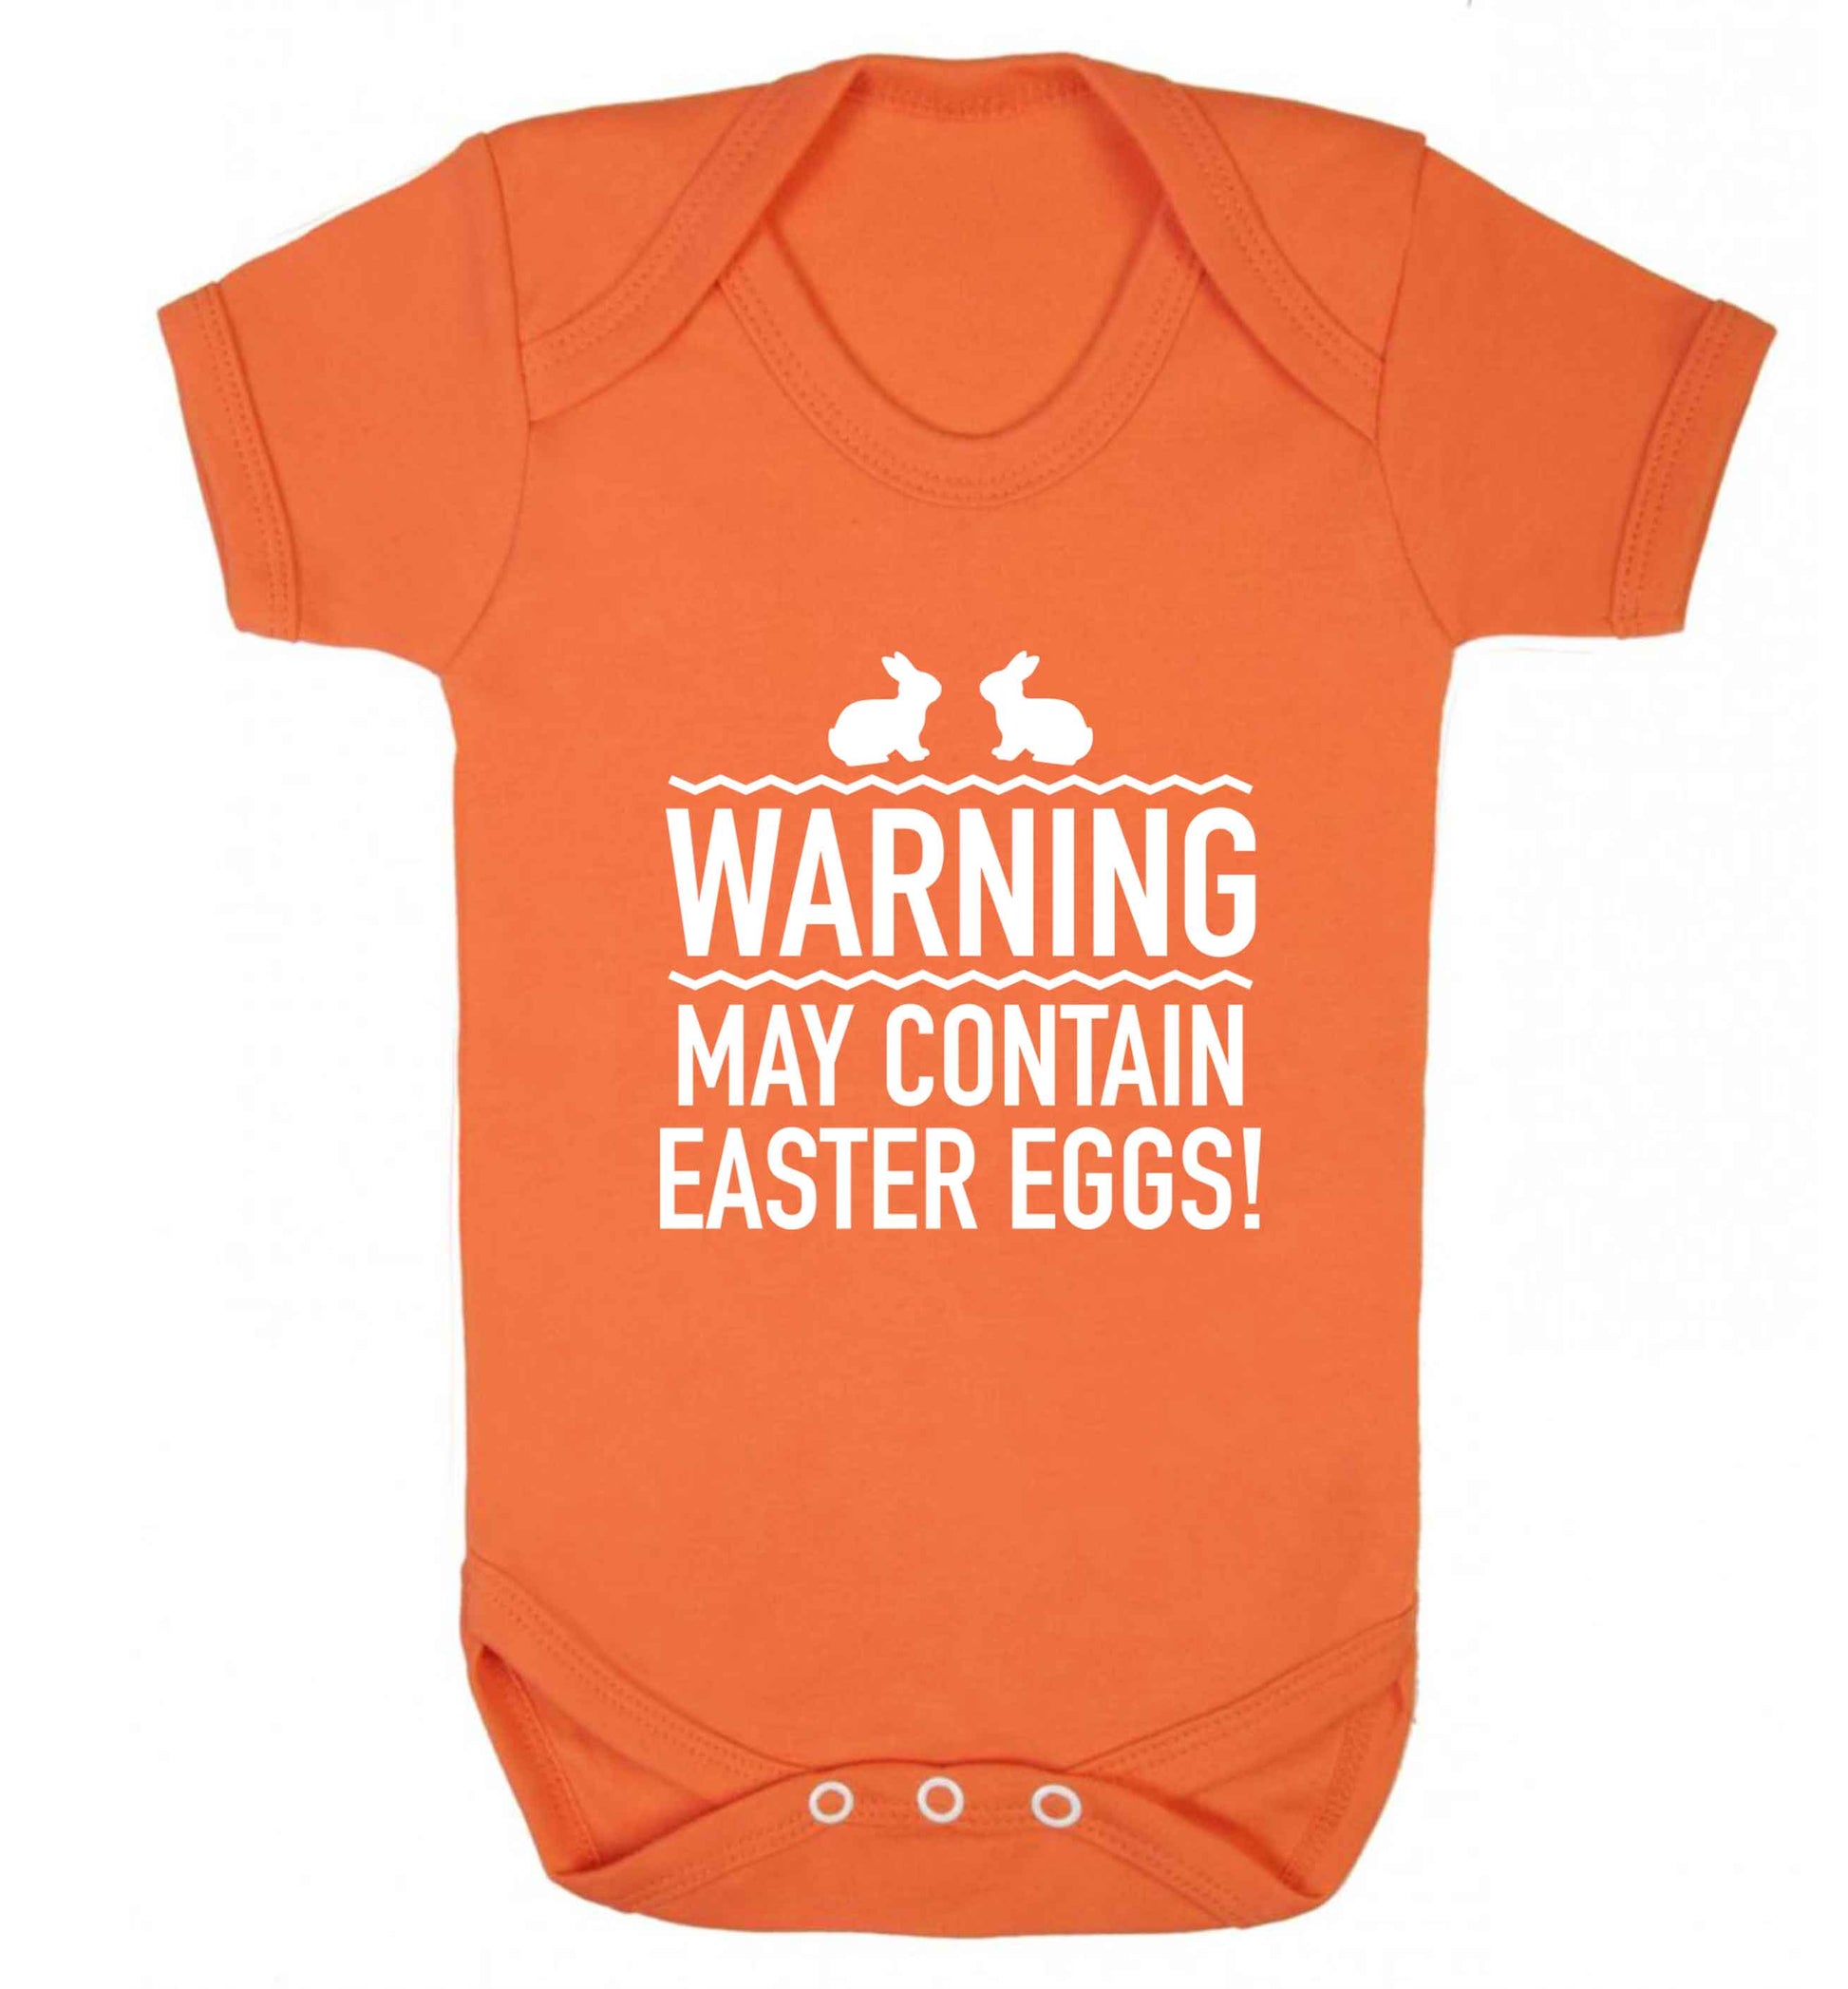 Warning may contain Easter eggs baby vest orange 18-24 months